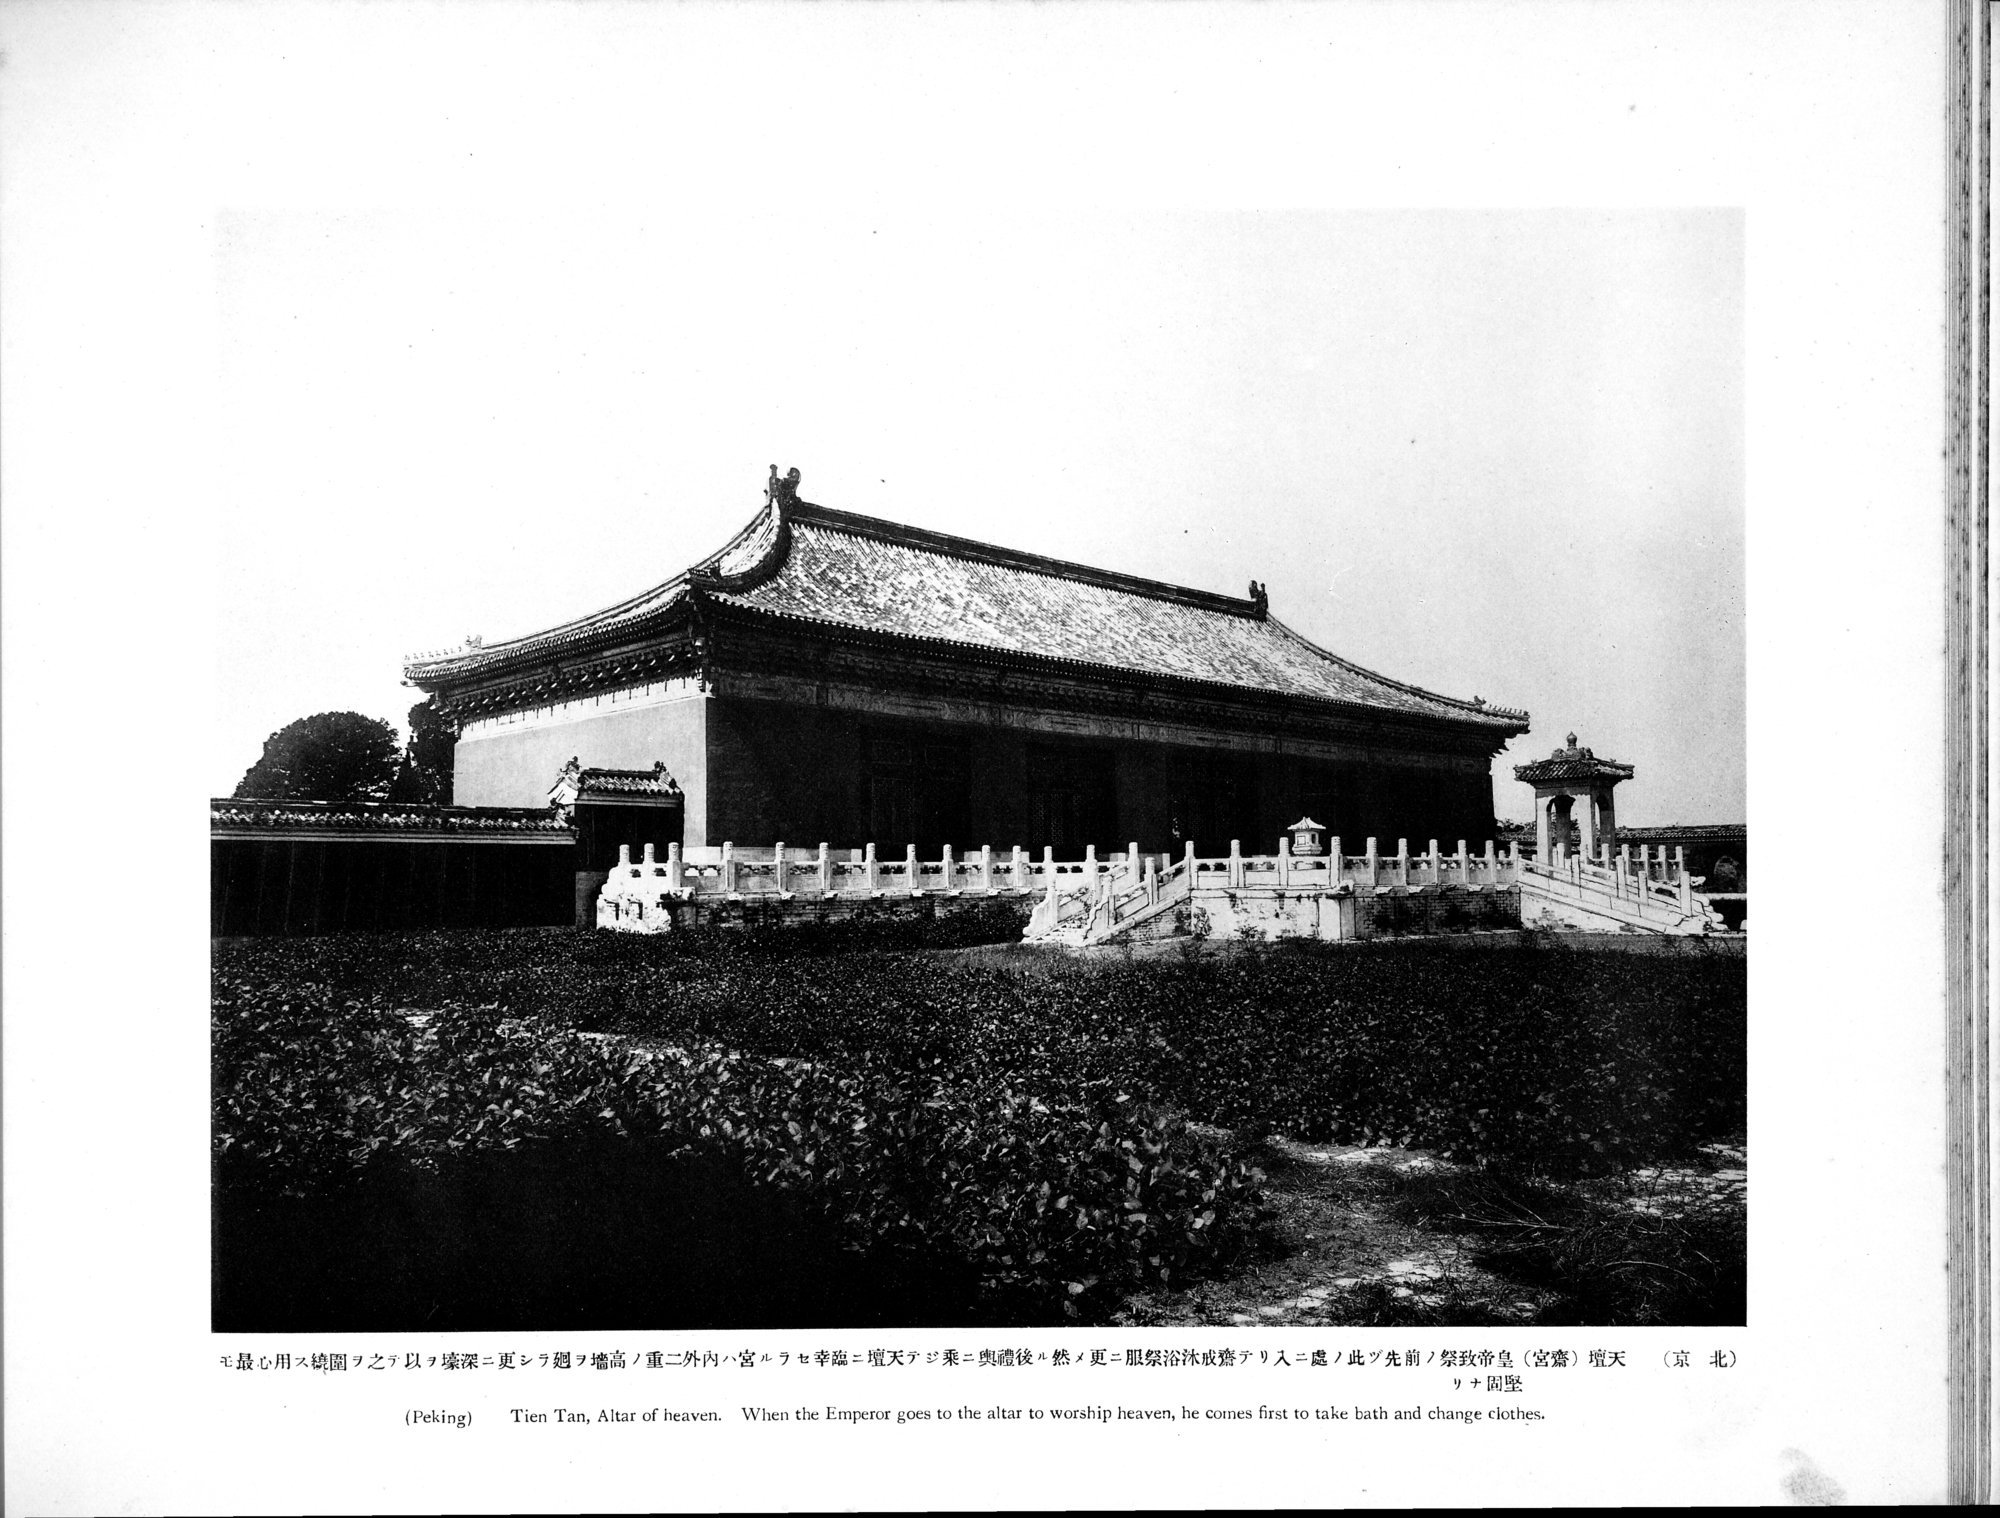 Views and Custom of North China : vol.1 / Page 145 (Grayscale High Resolution Image)